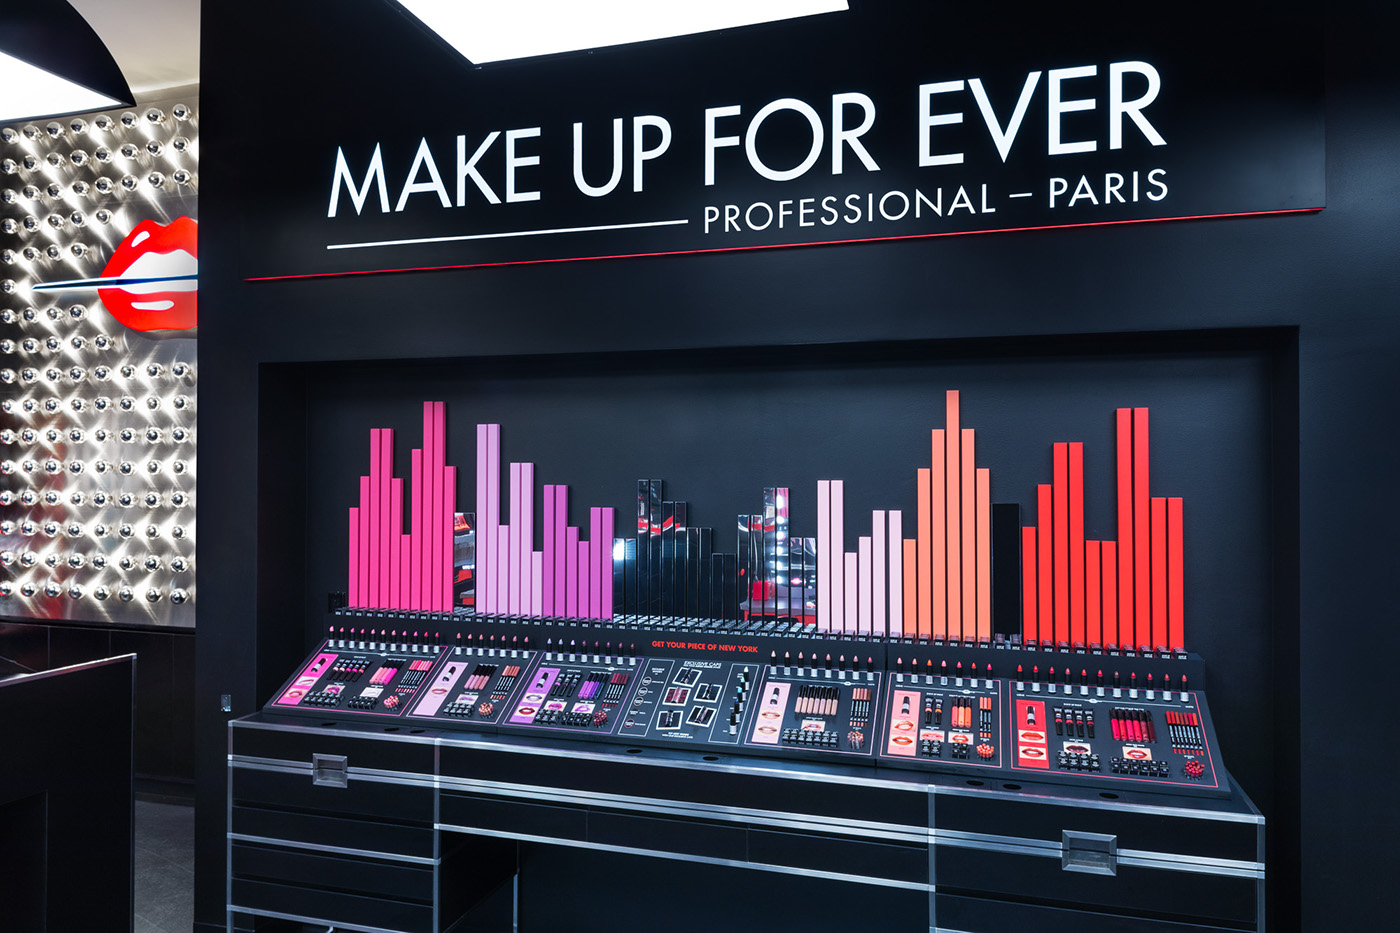 beauty Retail lexington ave New York flagship Make Up For Ever retail experience go pro store